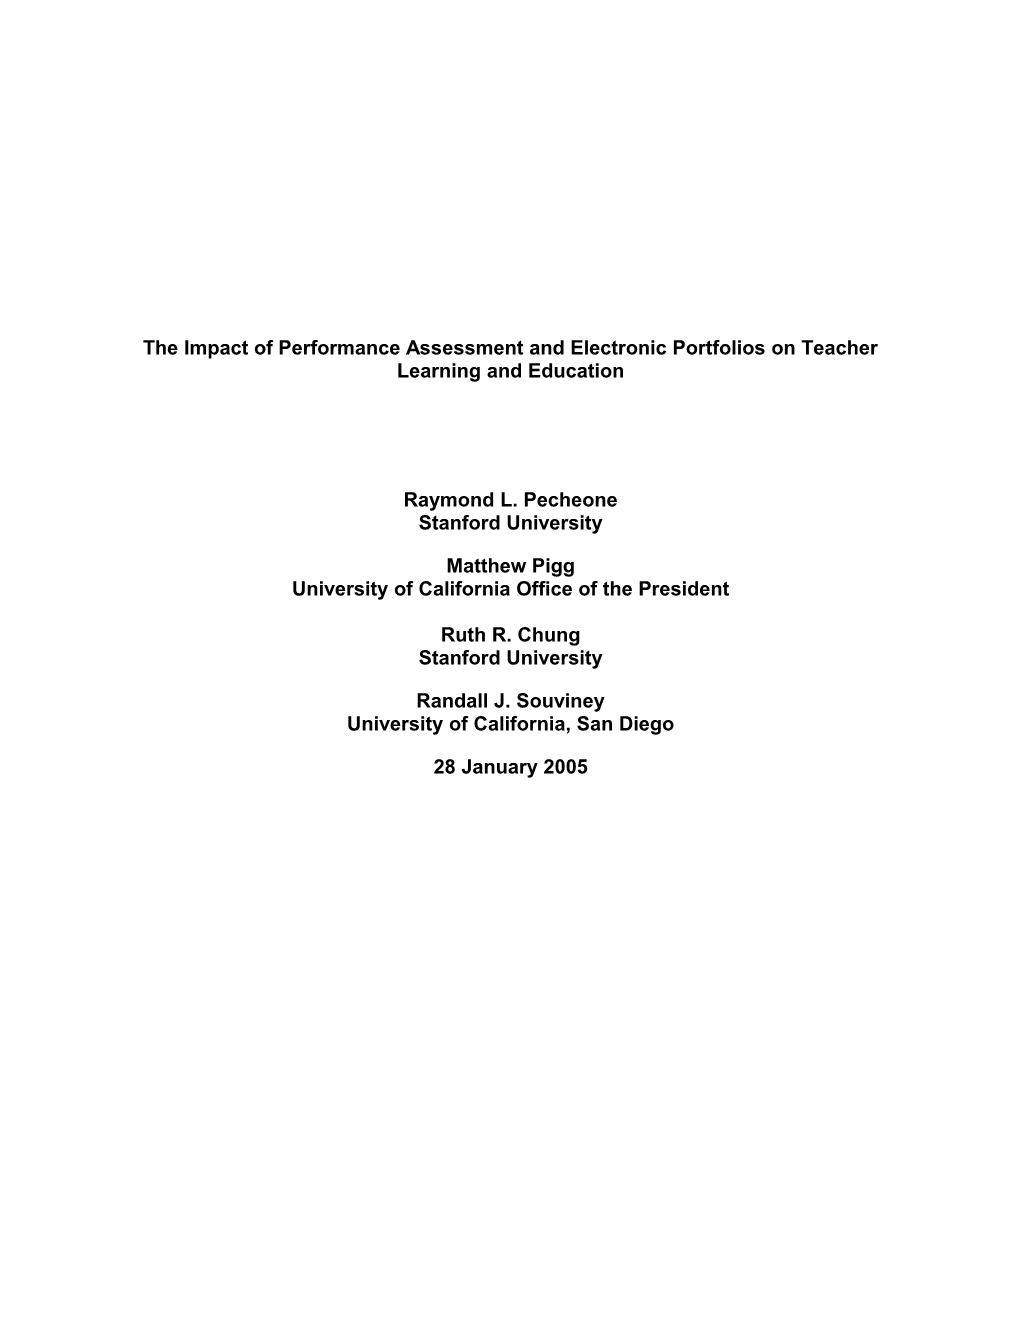 The Impact of Performance Assessment and Electronic Portfolios on Teacher Learning And